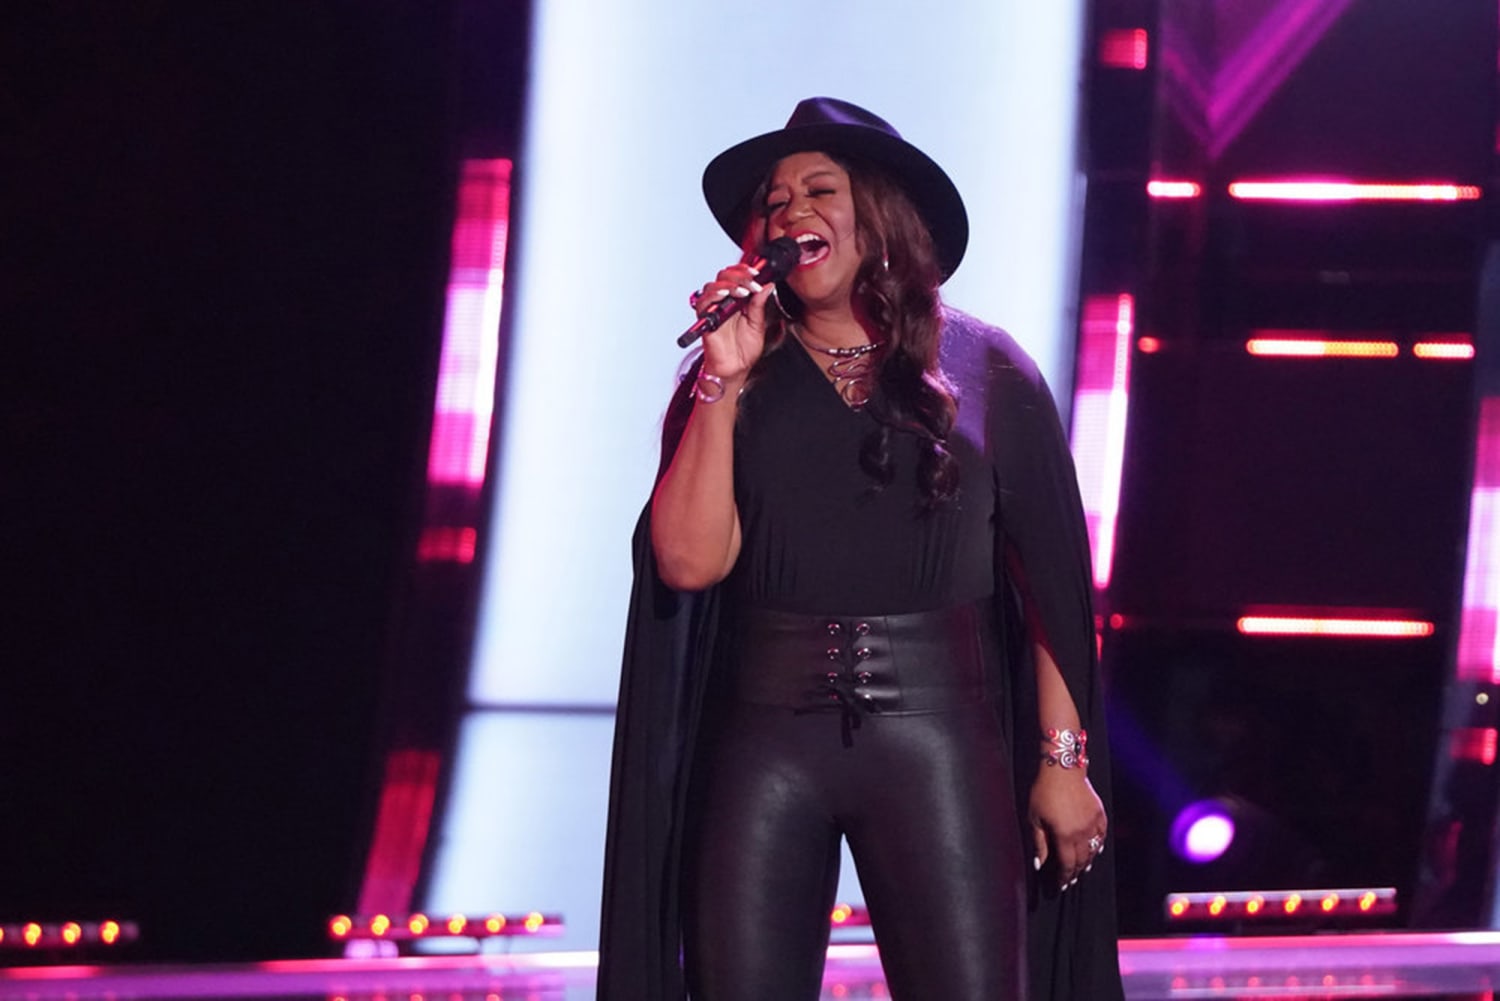 56-year-old singer shines in one of 'top 3 blind auditions of all time'